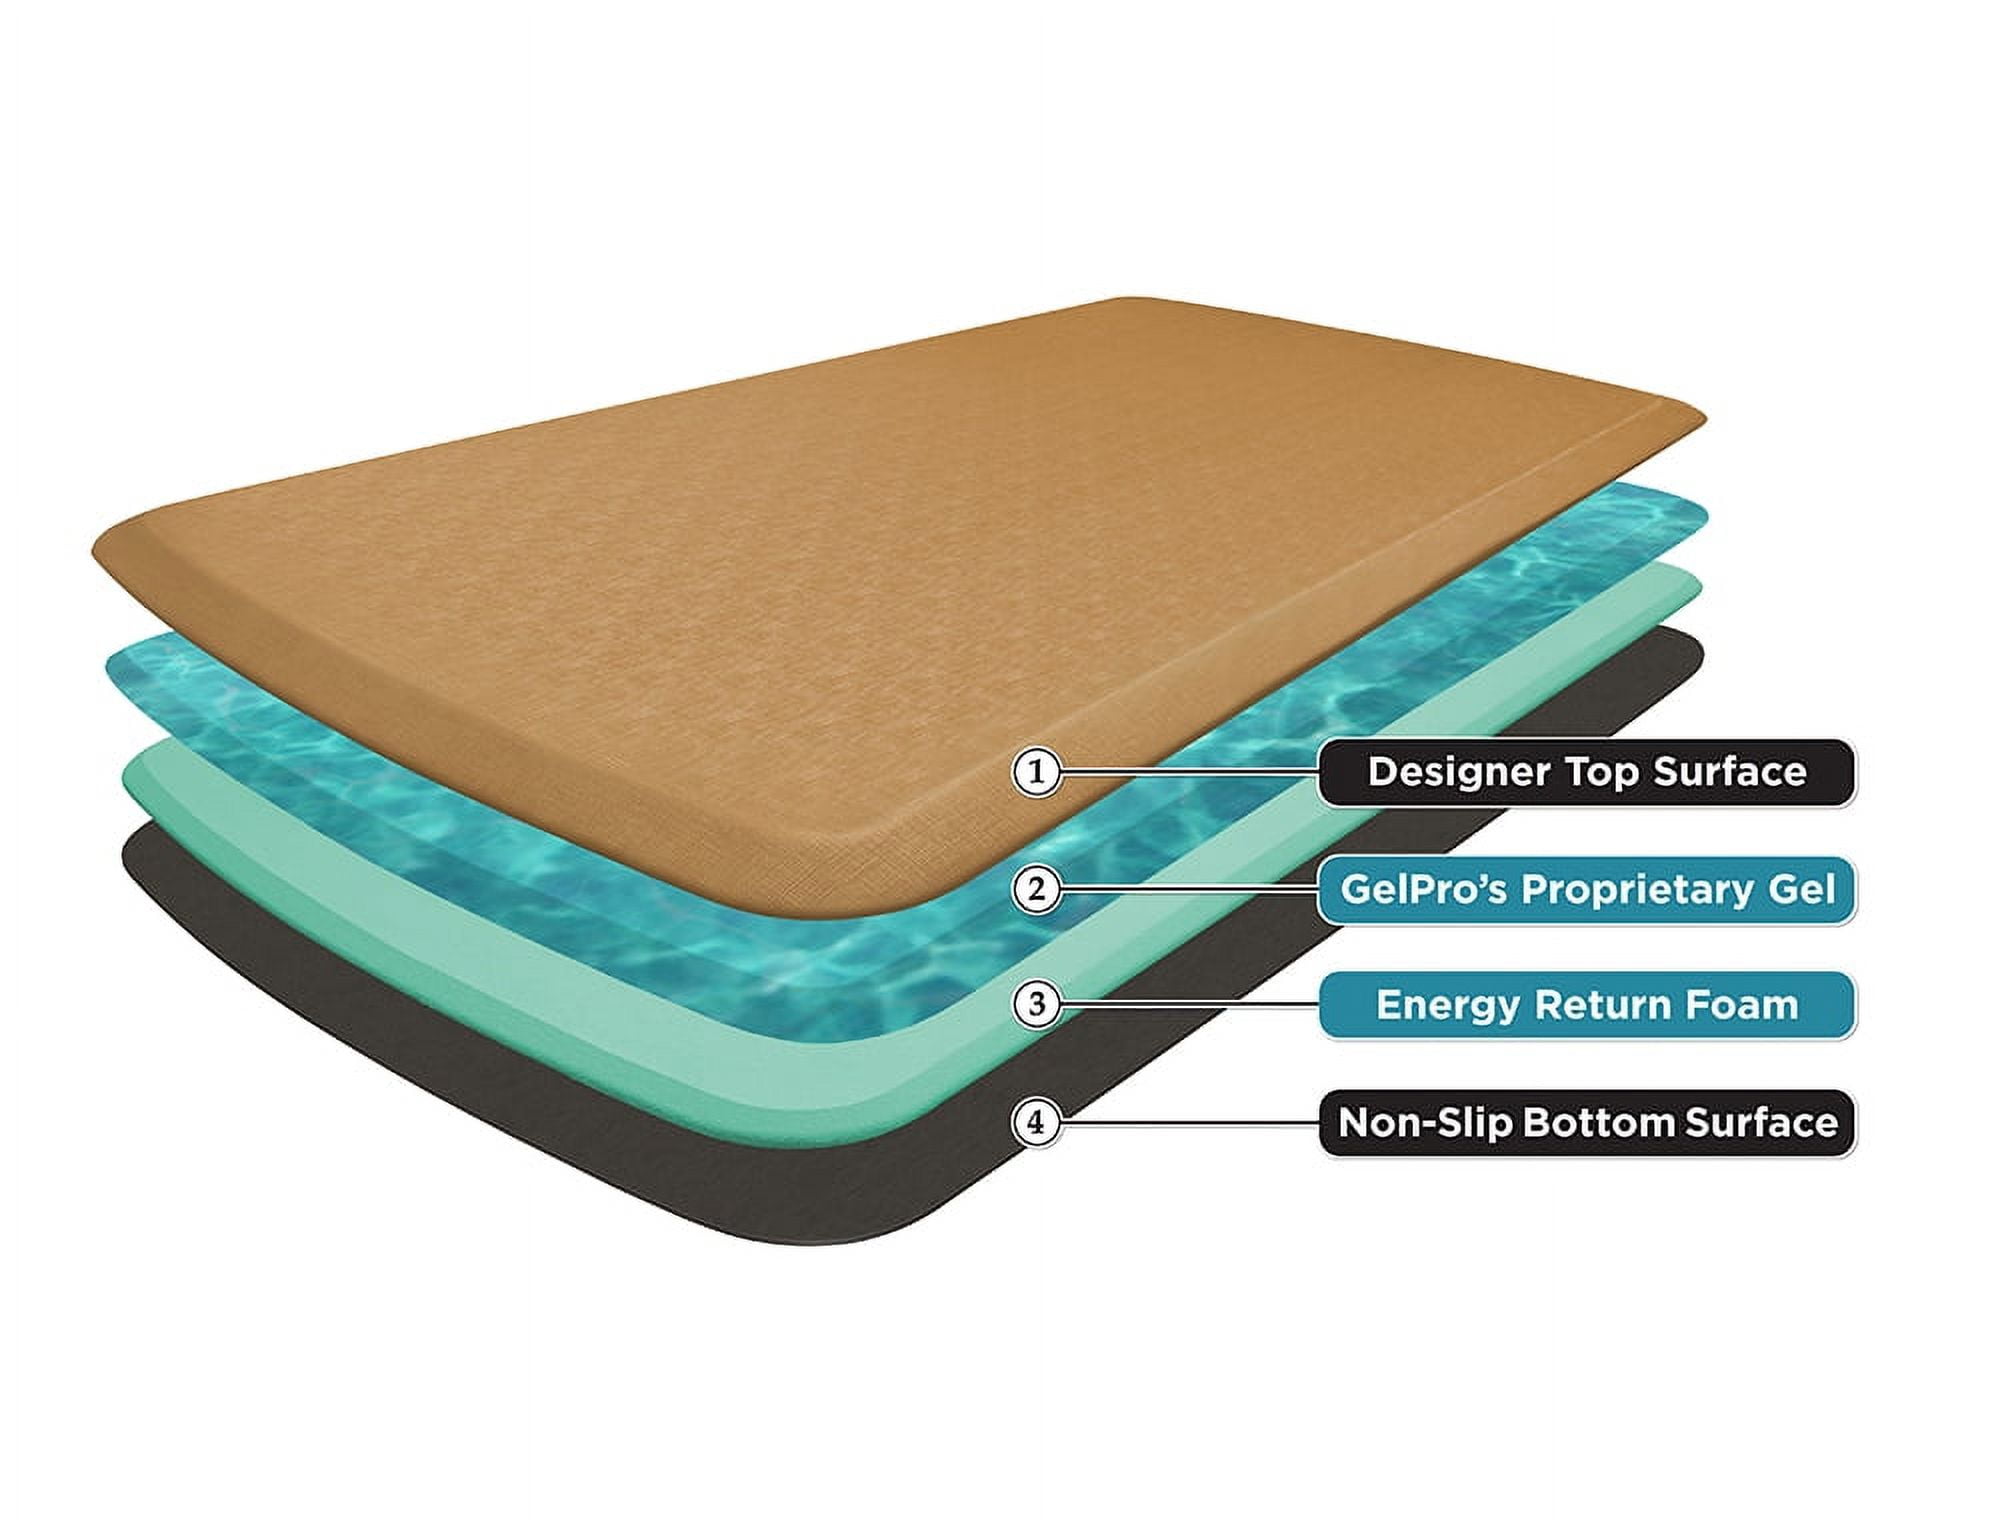 Give Your Tired and Sore Feet a Break with a GelPro Elite Mat